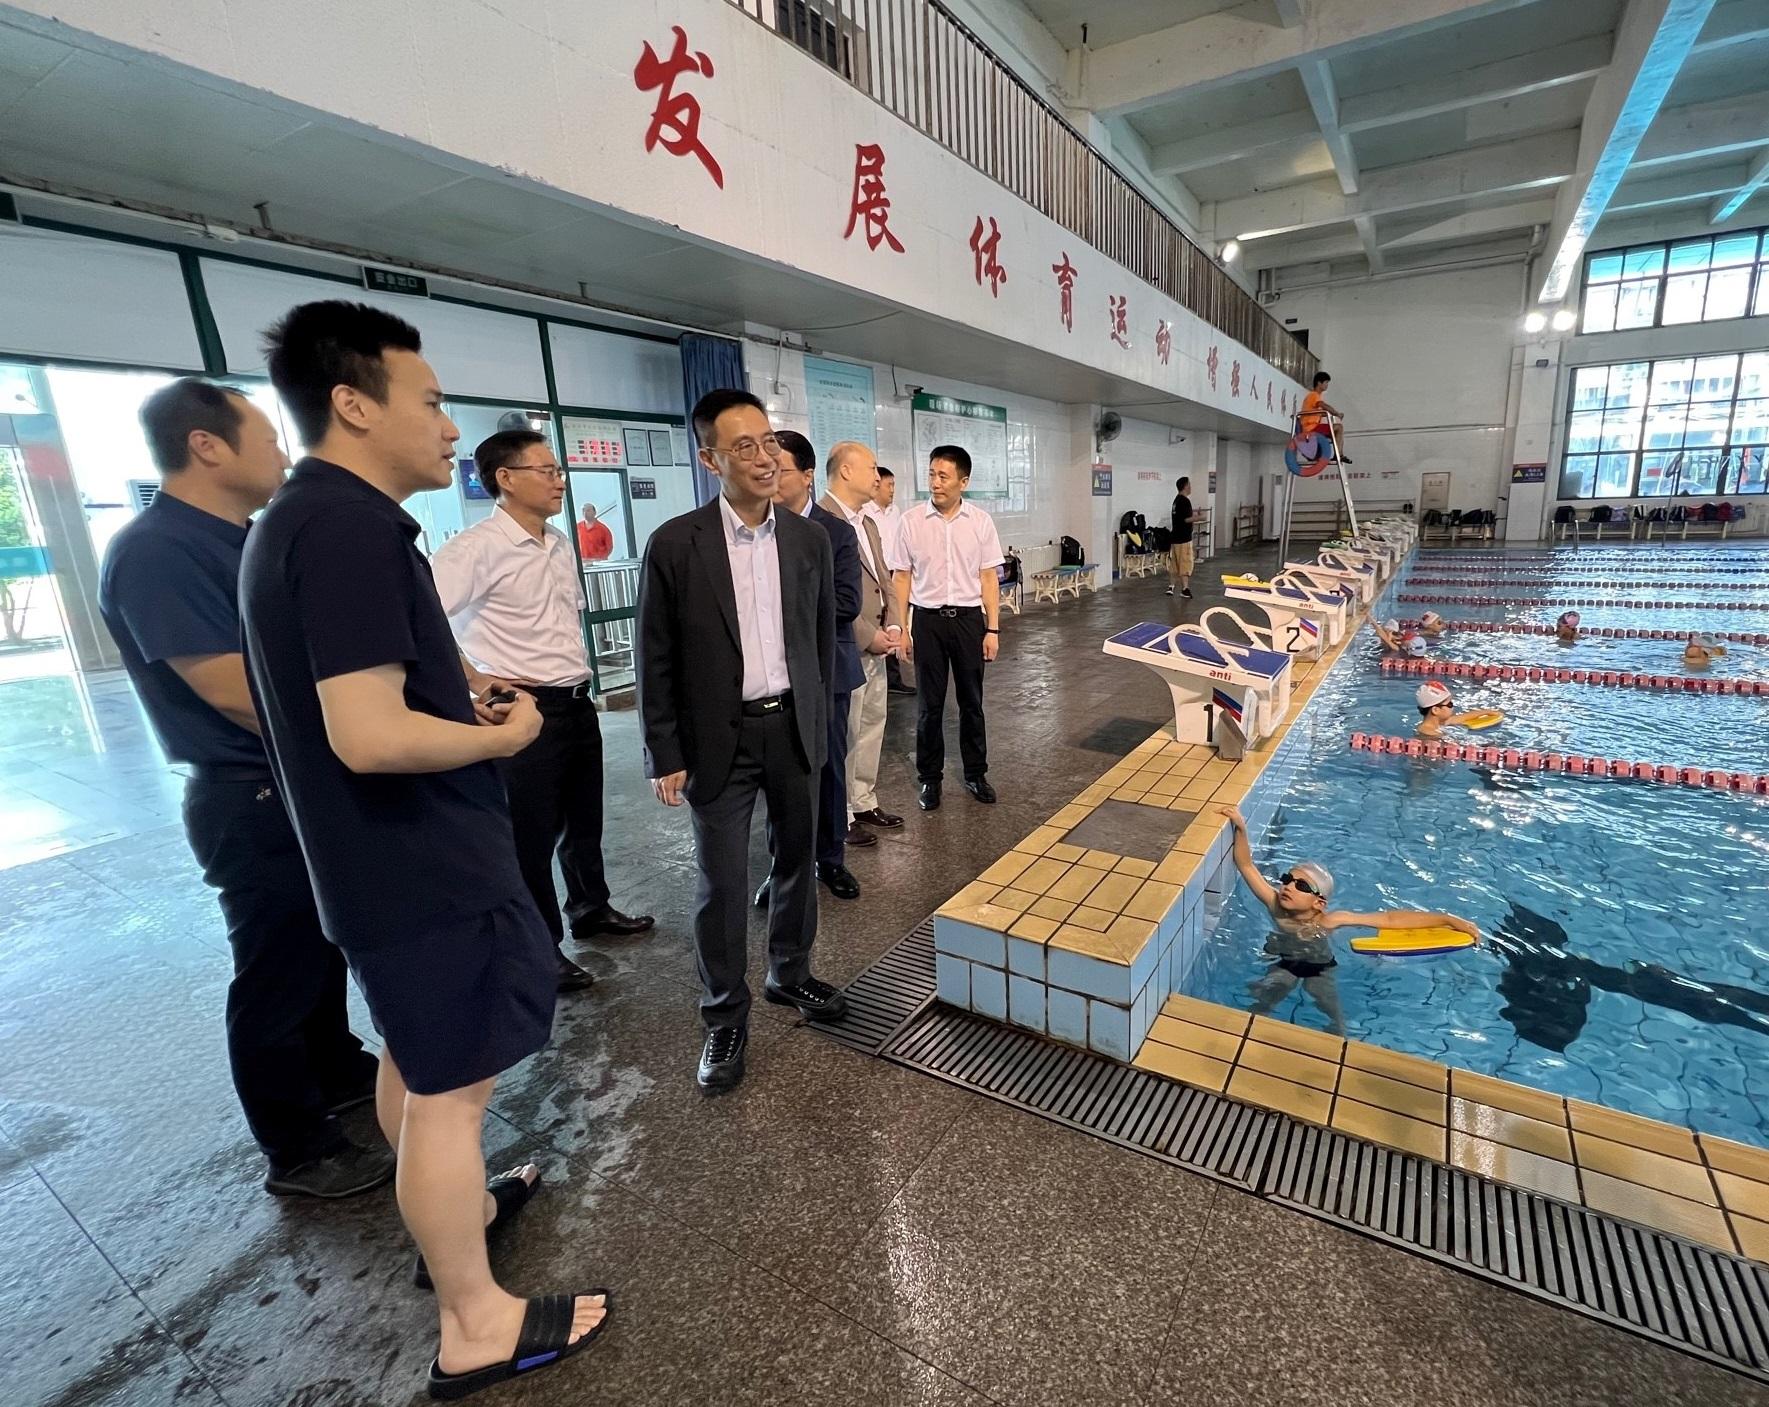 The Secretary for Culture, Sports and Tourism, Mr Kevin Yeung (fourth left), continued his visit in Hangzhou today (August 1) and visited the Hangzhou Chen Jinglun Sports School under the Hangzhou Sports Bureau.